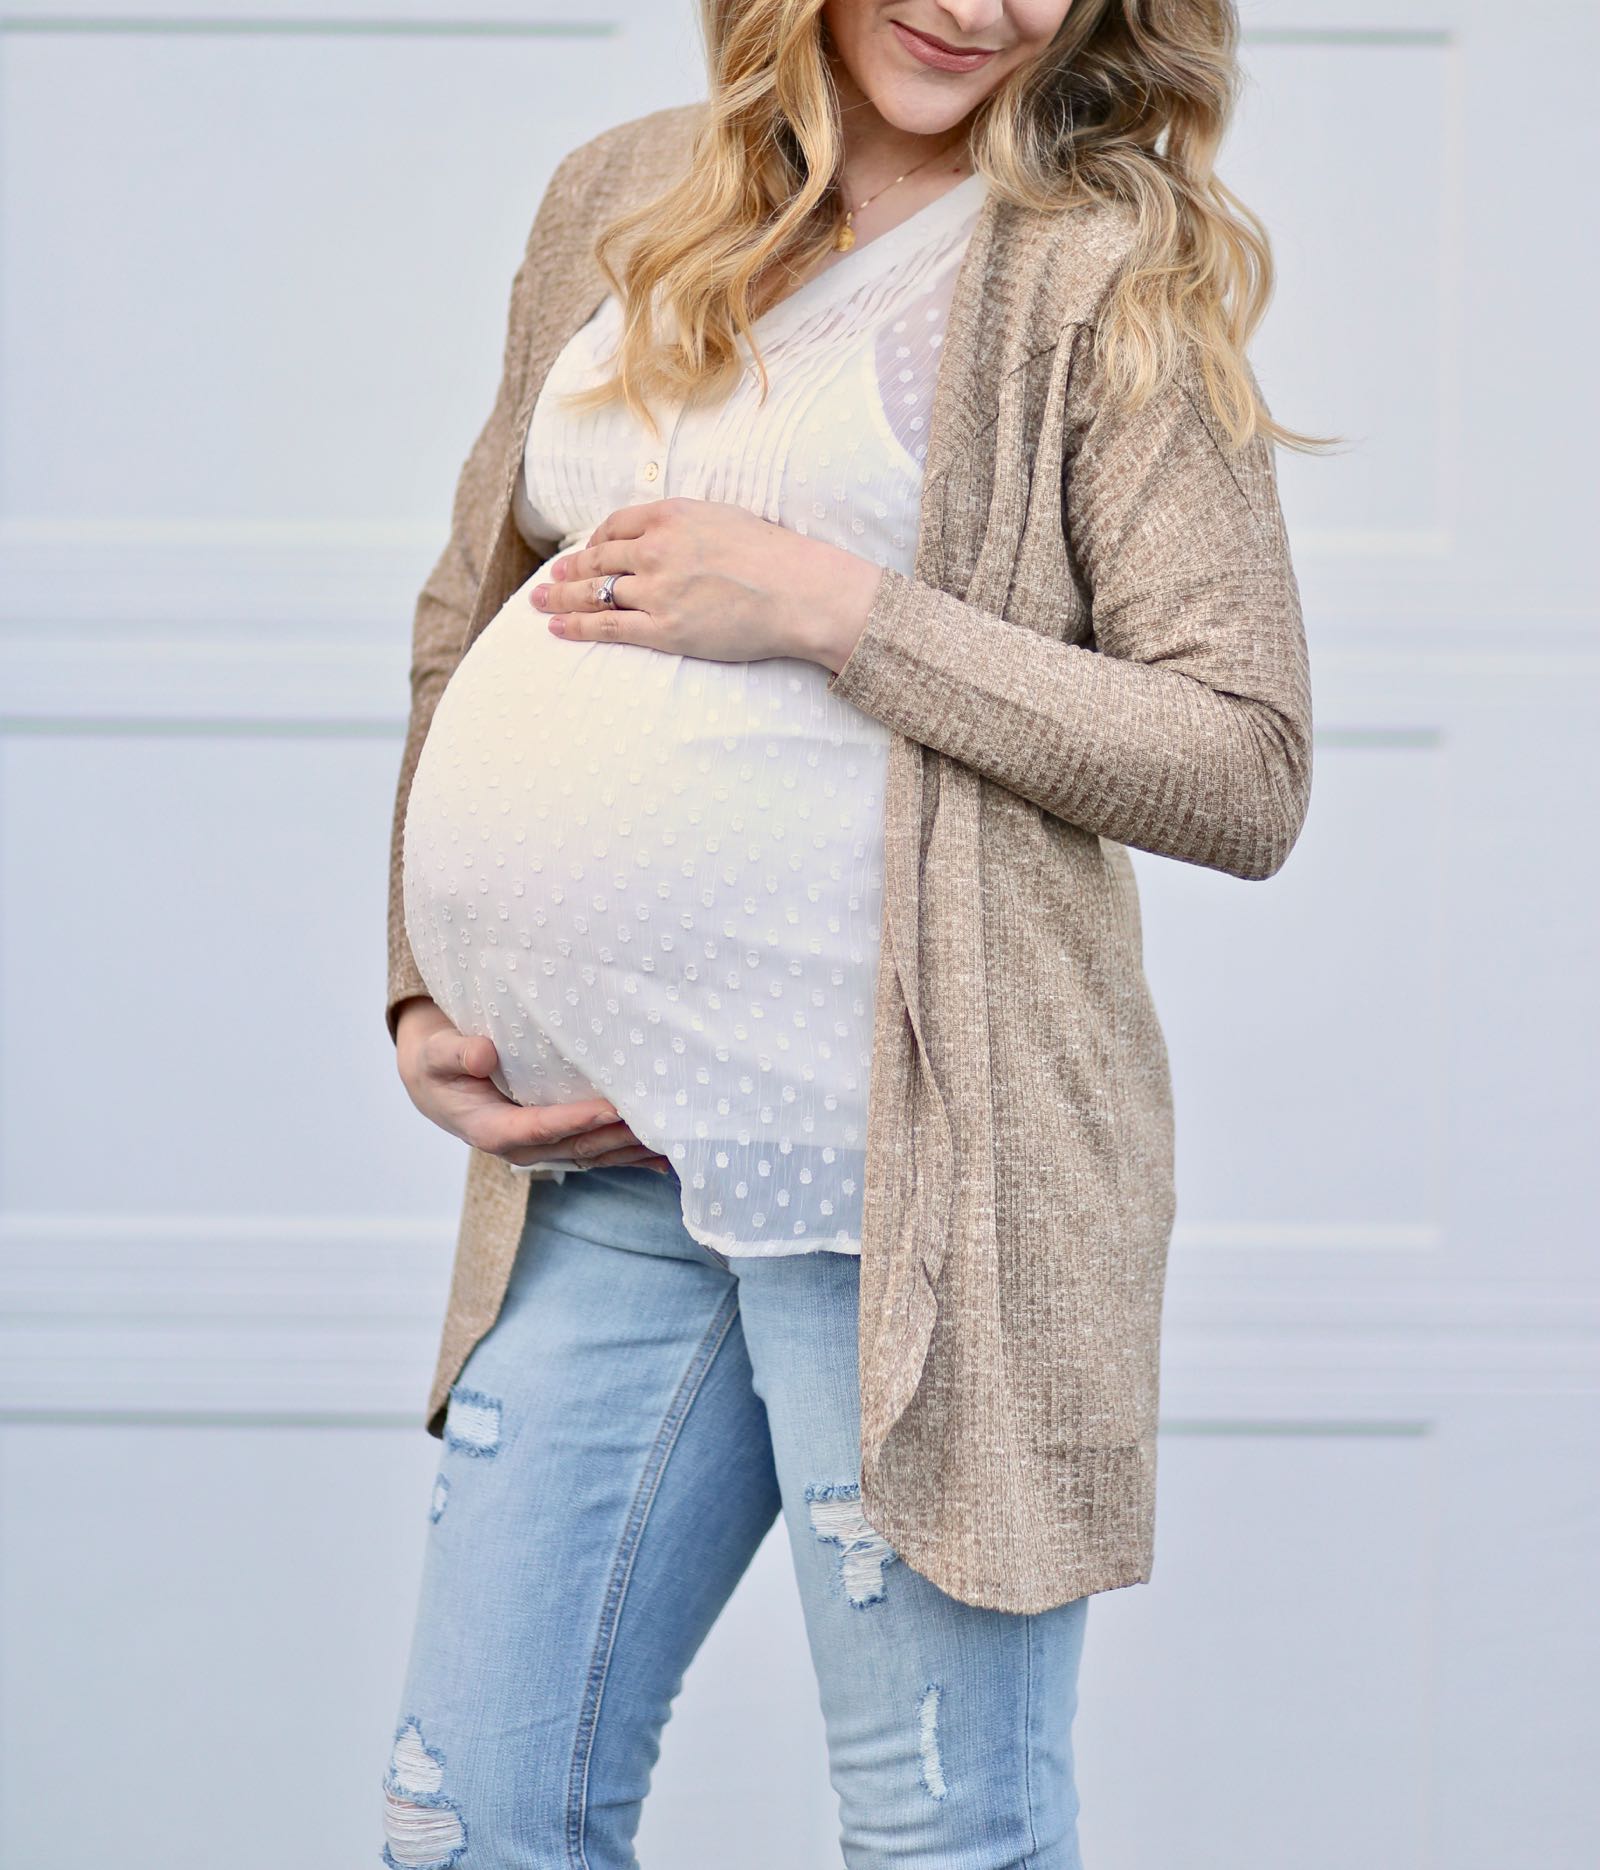 #ad Casual spring outfit idea featuring sleeveless top, distressed jeans and cardigan #40weeksofchic #apeainthepod #motherhoodmaternity #maternityfashion #outfitidea